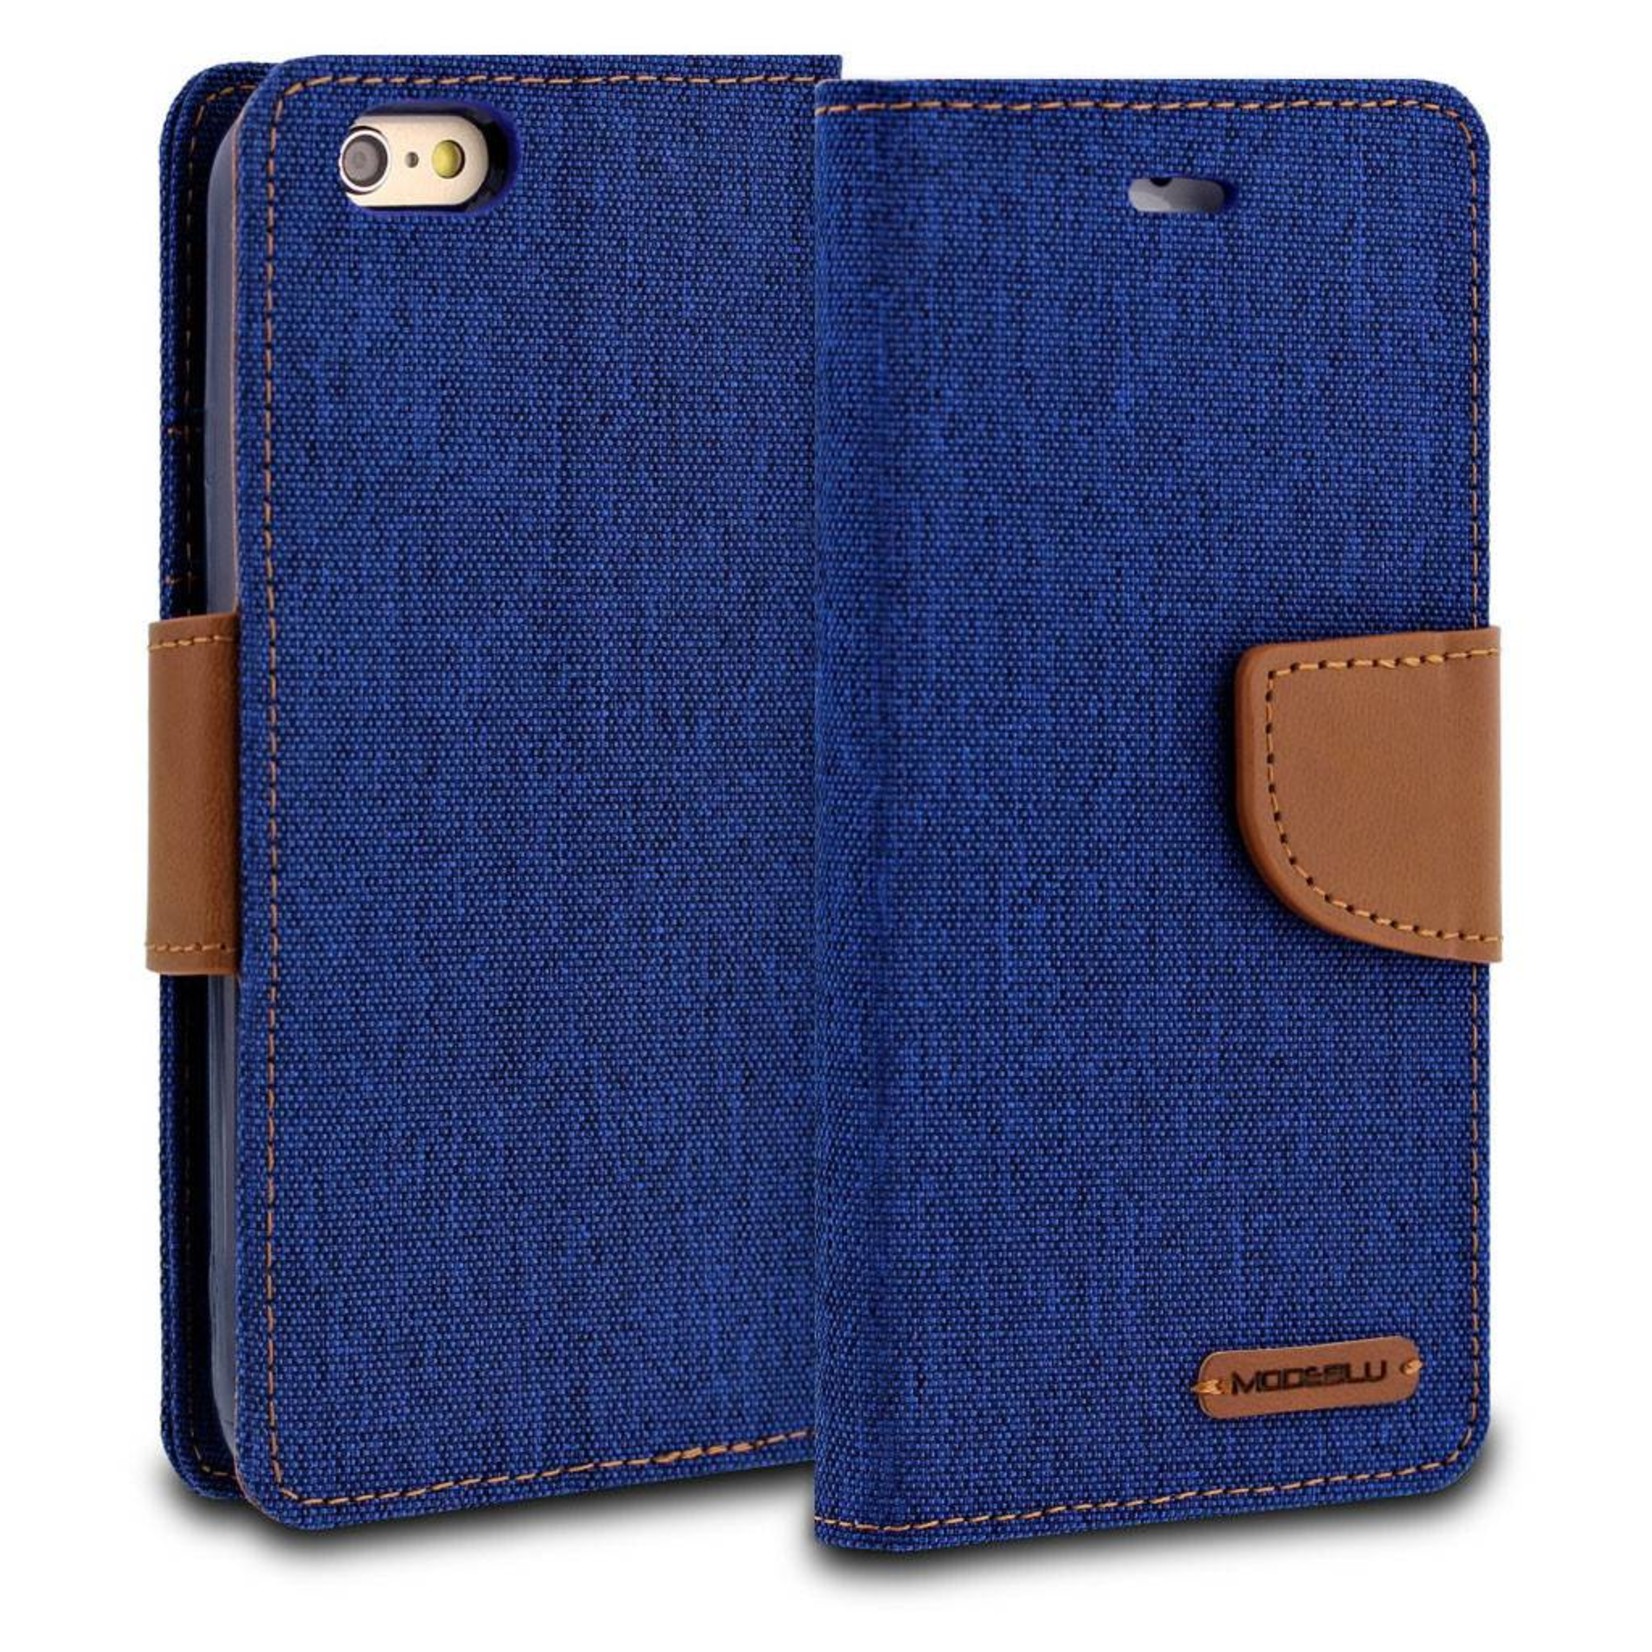 ModeBlu Canvas Wallet Pocket Diary Case for iPhone 6/6S Plus